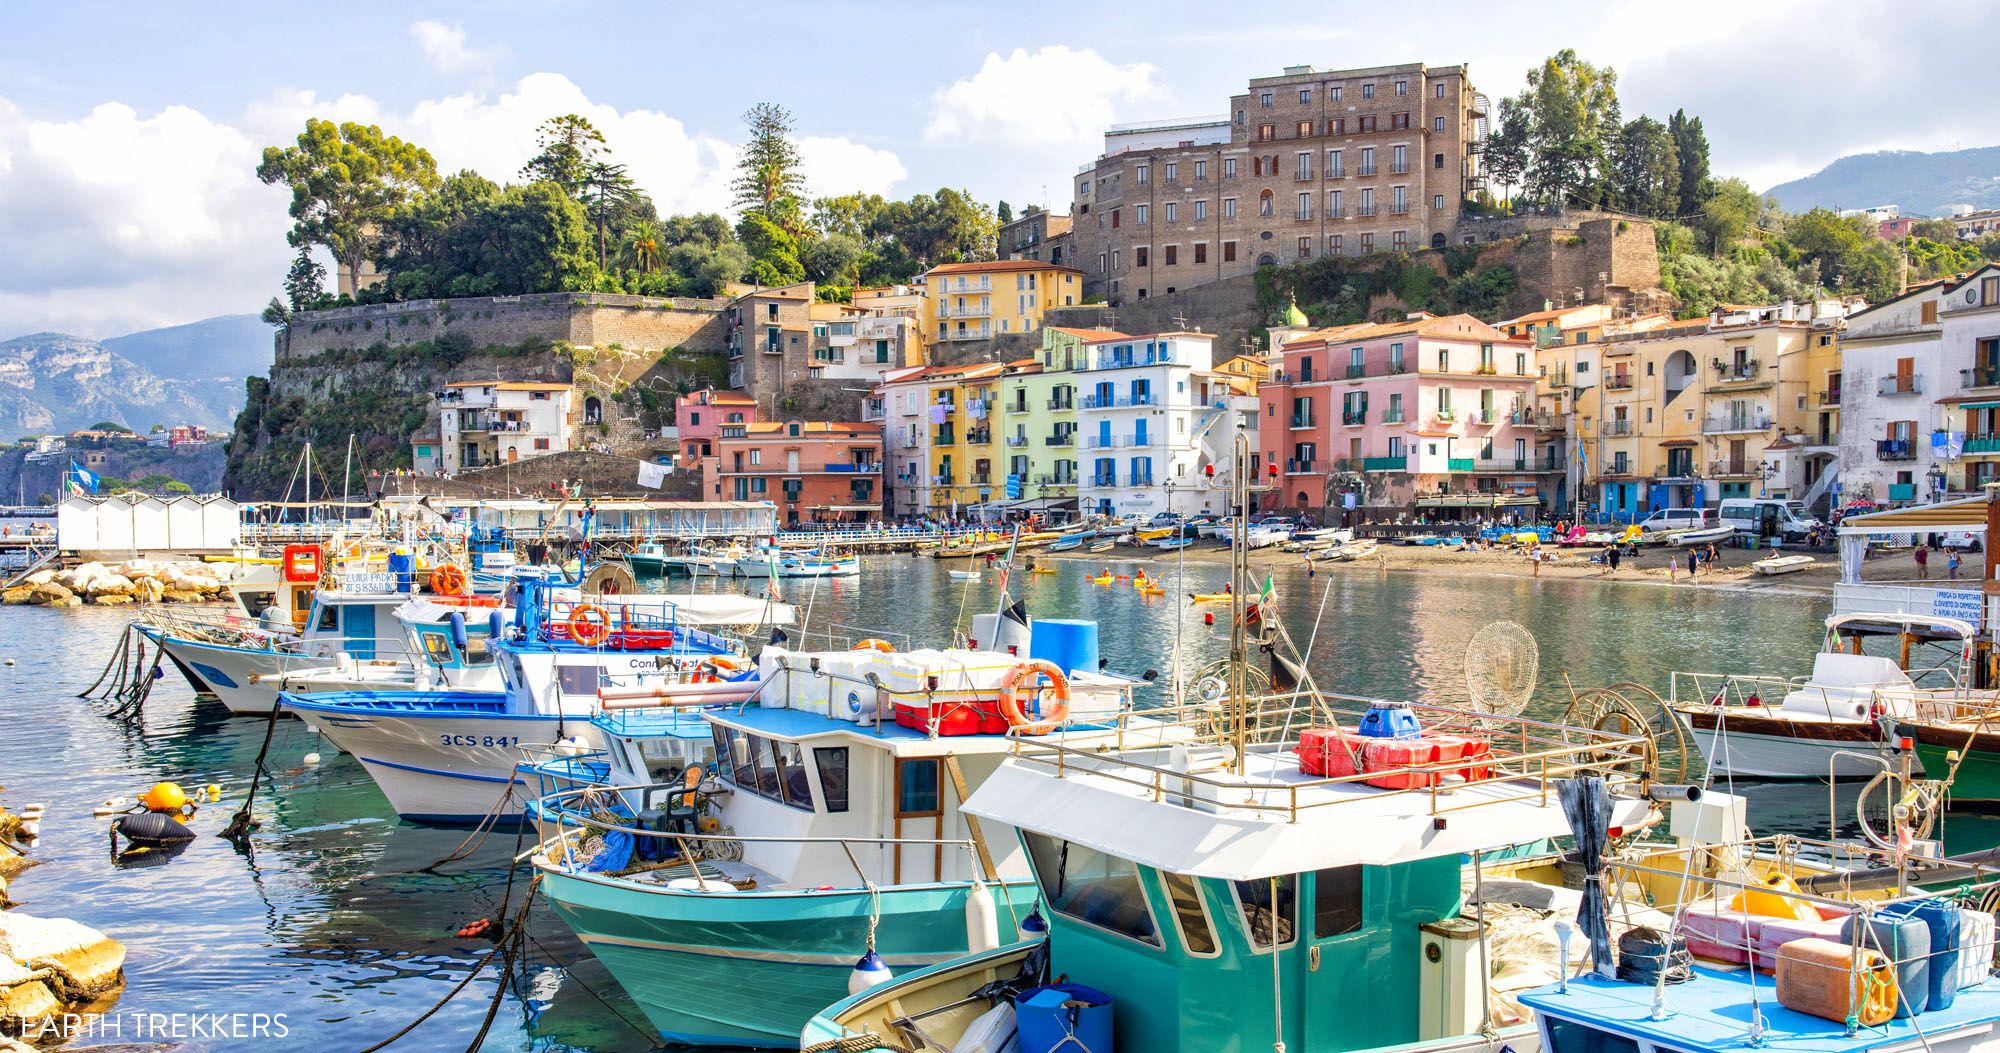 Things to Do in Sorrento